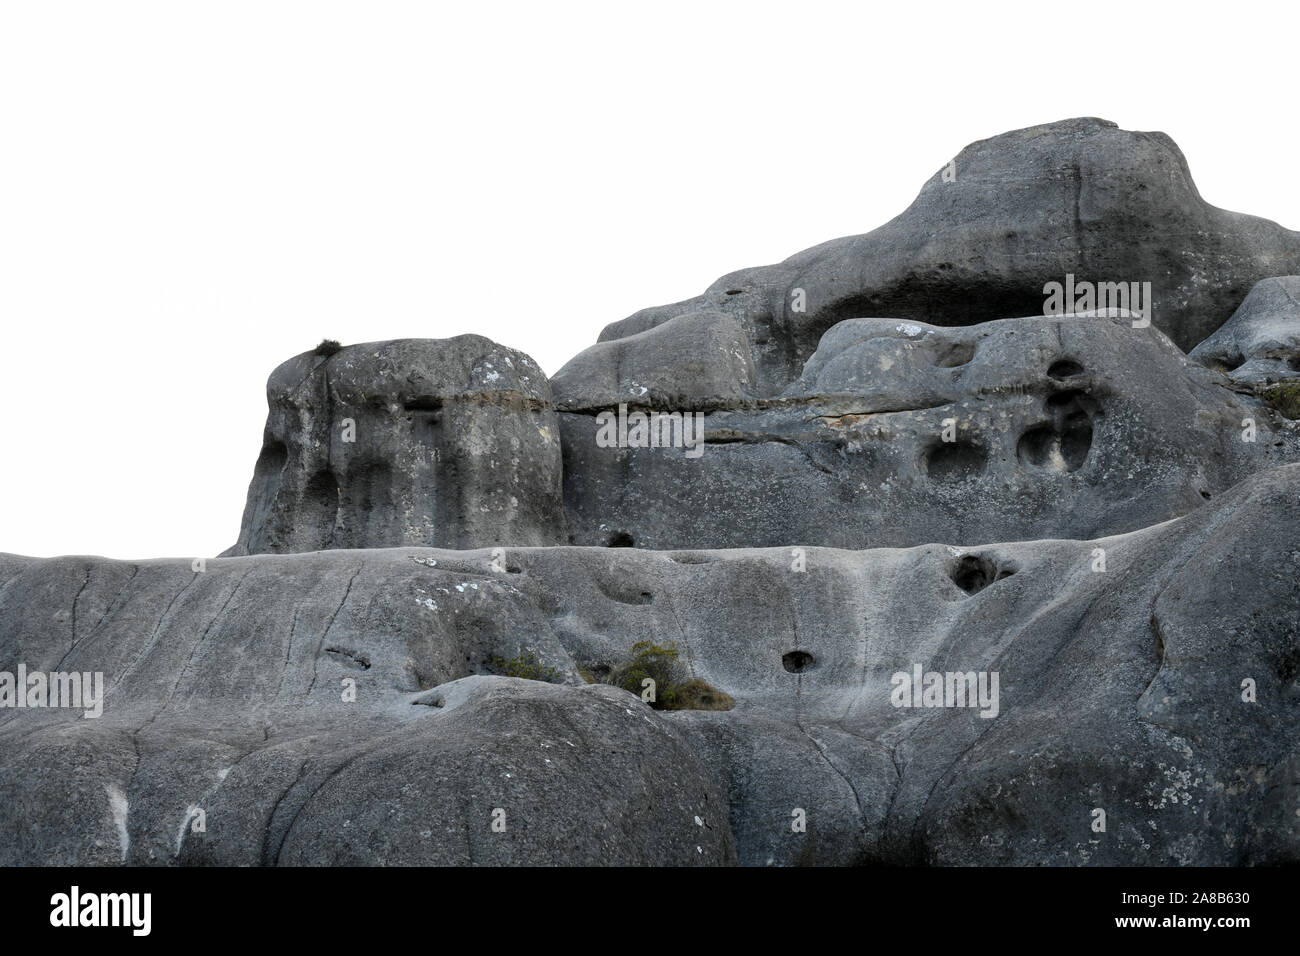 Full frame image of limestone rocks at Castle Hill in the South Island of New Zealand Stock Photo